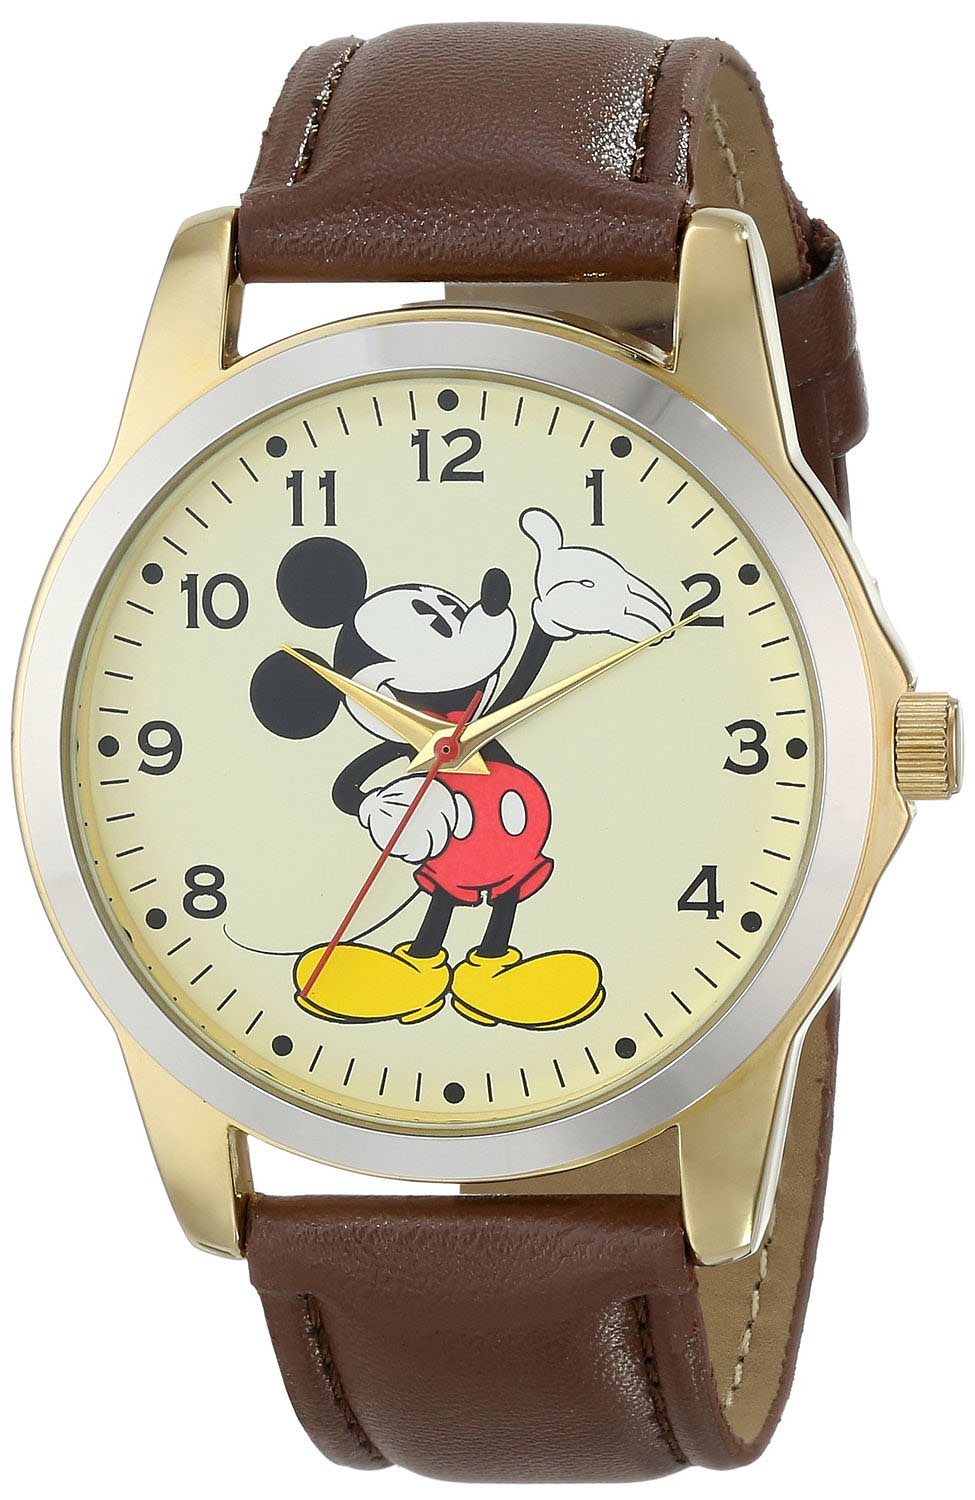 NEW Men's Disney Mickey Mouse Large Watch